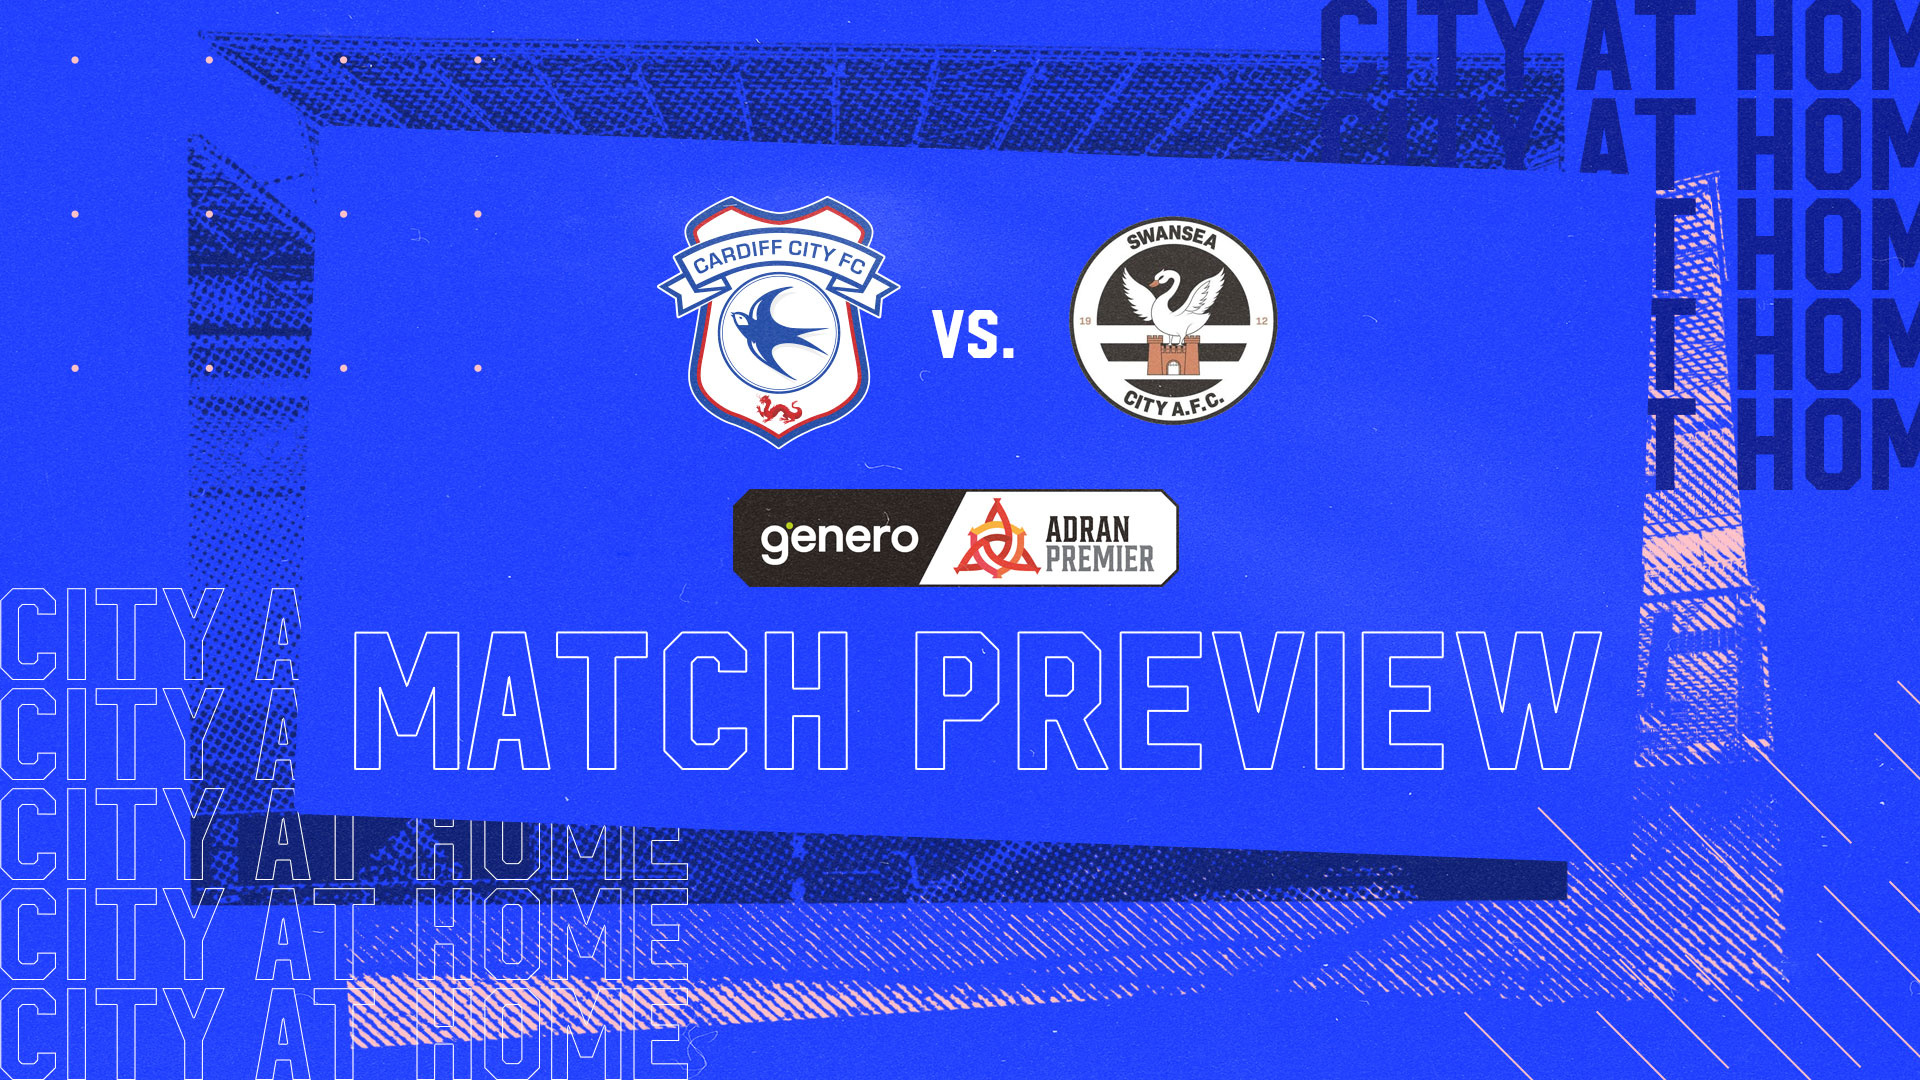 The Bluebirds host the Swans this weekend...